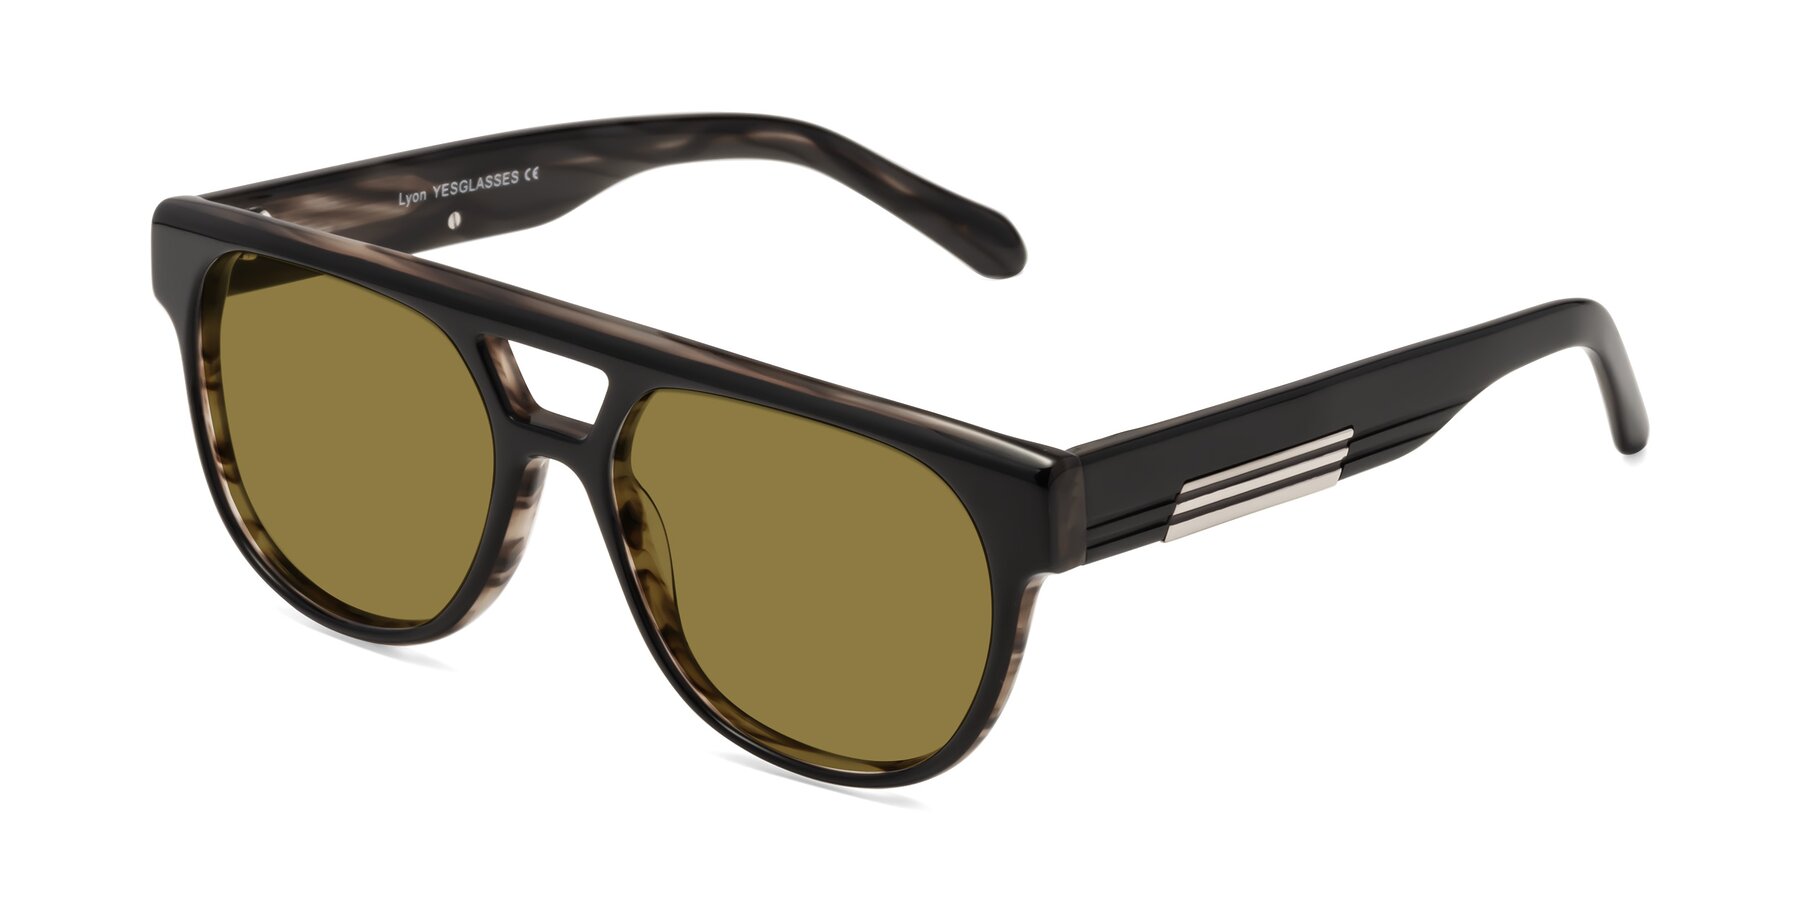 Angle of Lyon in Black-Brown with Brown Polarized Lenses